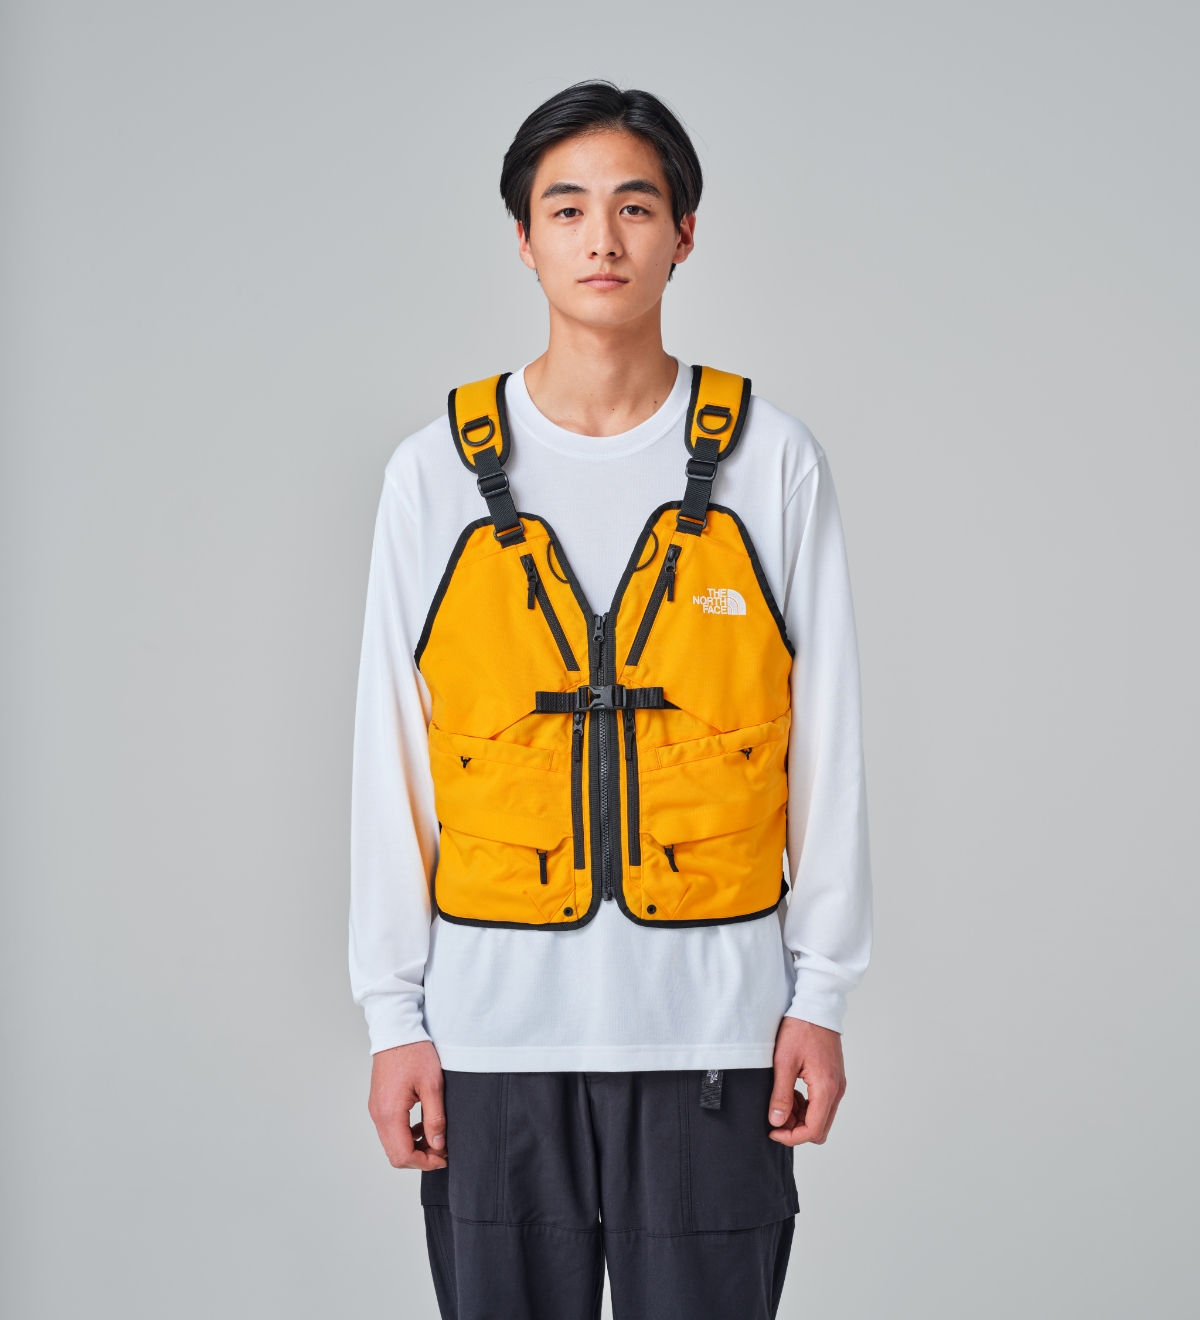 Gear Mesh Vest | Online Camp Store | THE NORTH FACE CAMP